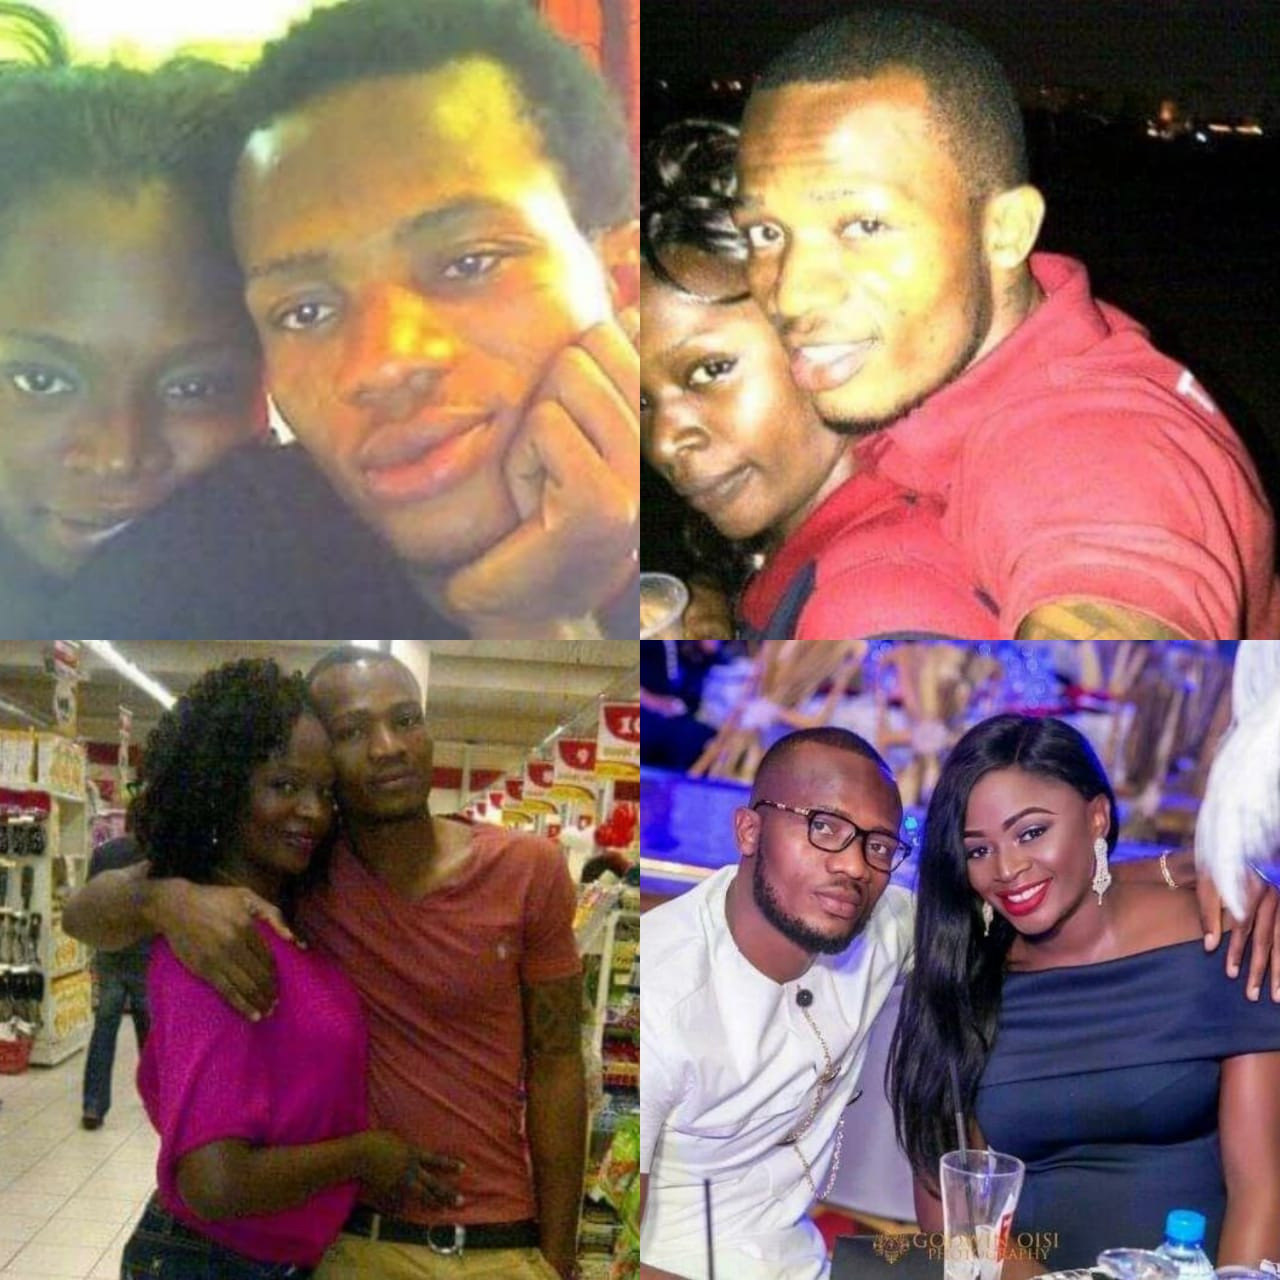 THROWBACK PHOTOS OF IVD AND HIS LATE WIFE BIMBO WHEN THEY WERE YOUNG LOVERS